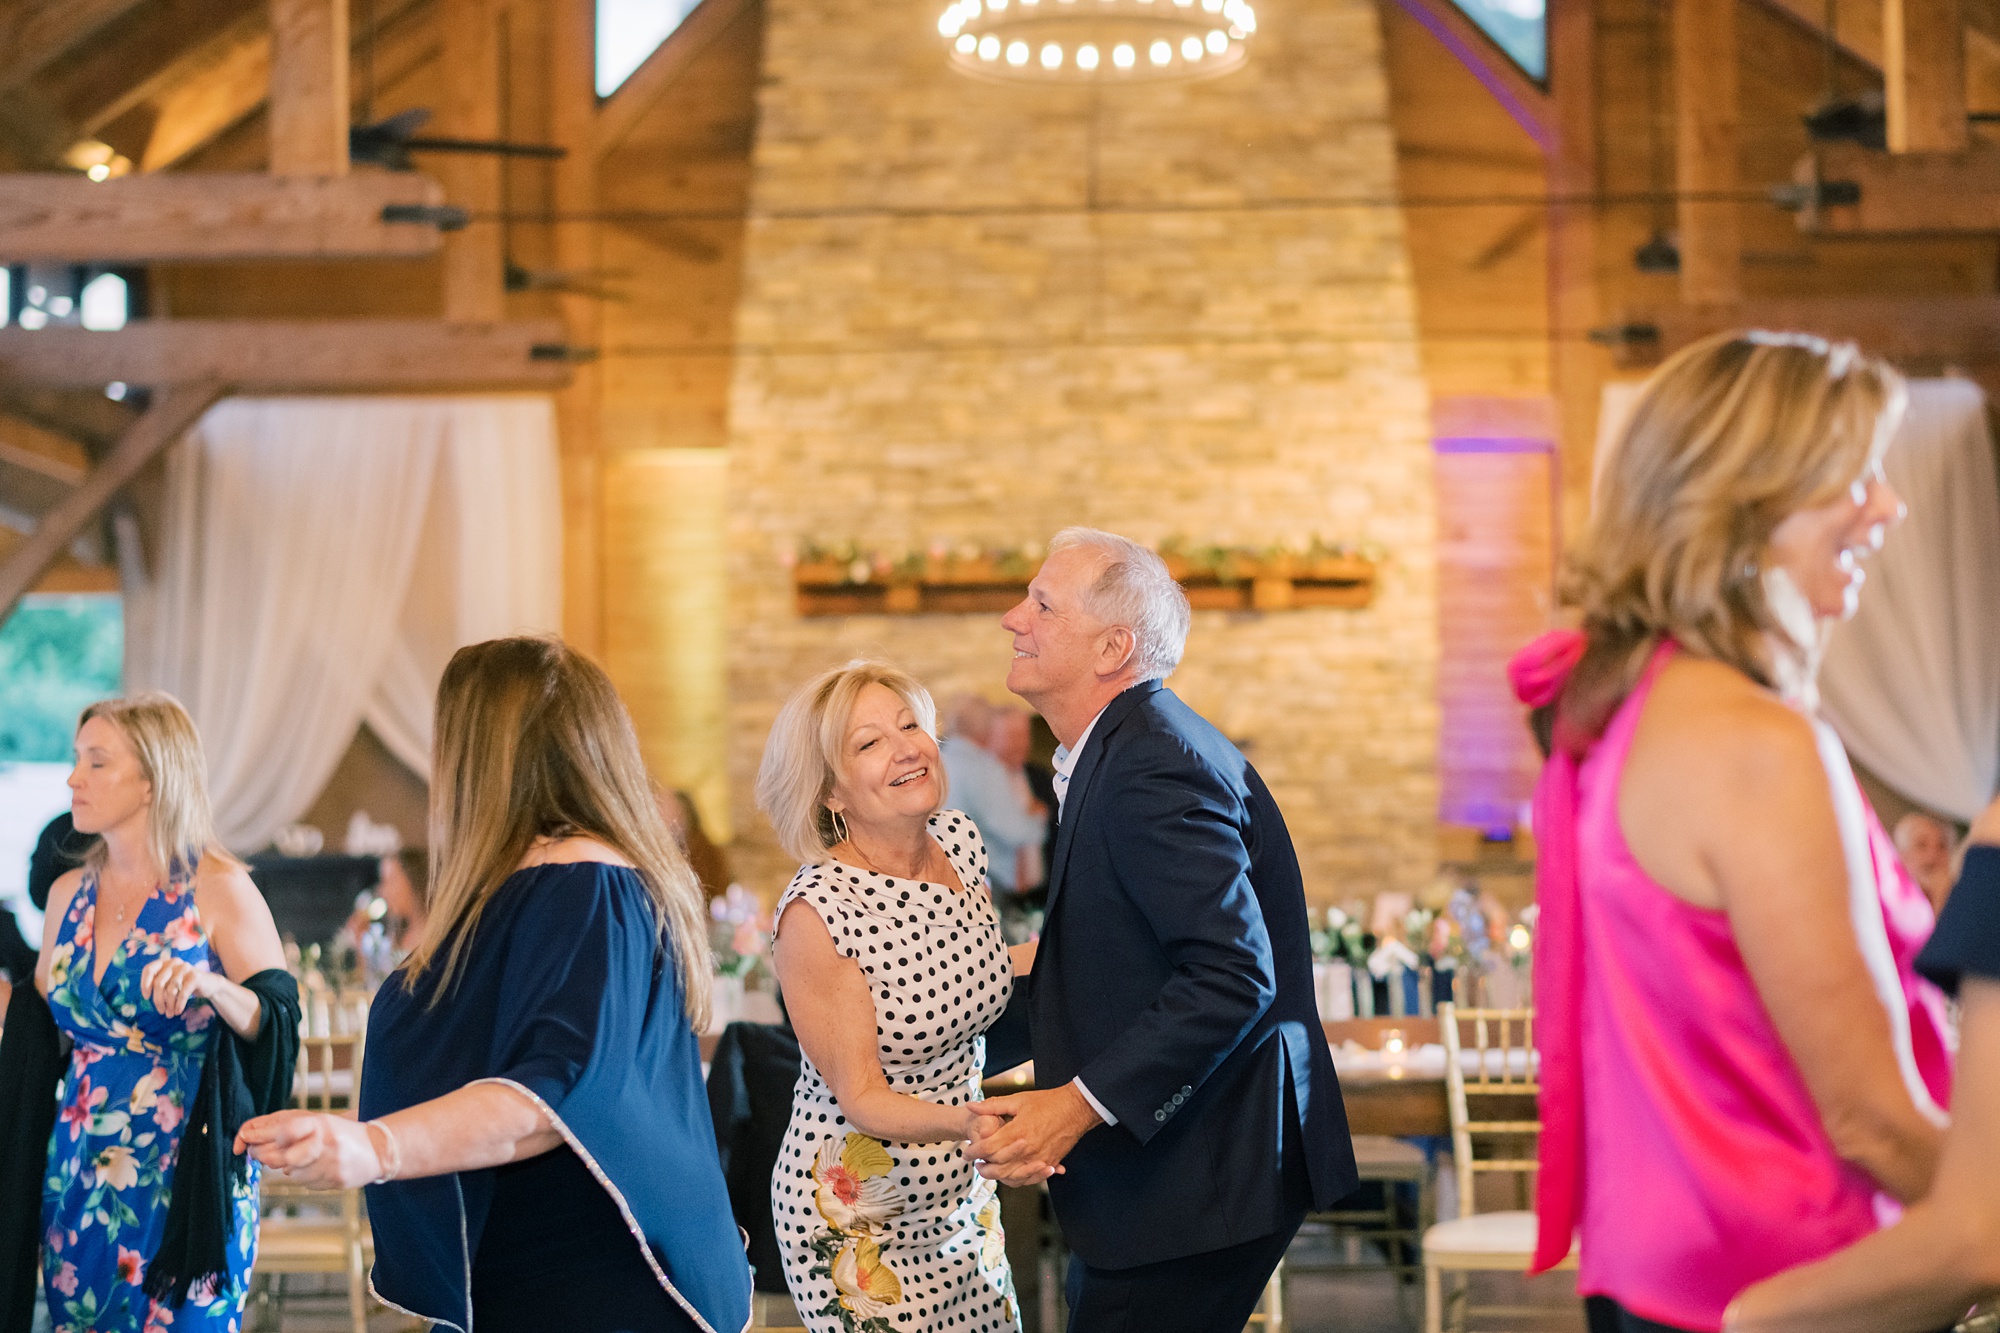 guests dance during Maryland wedding reception 